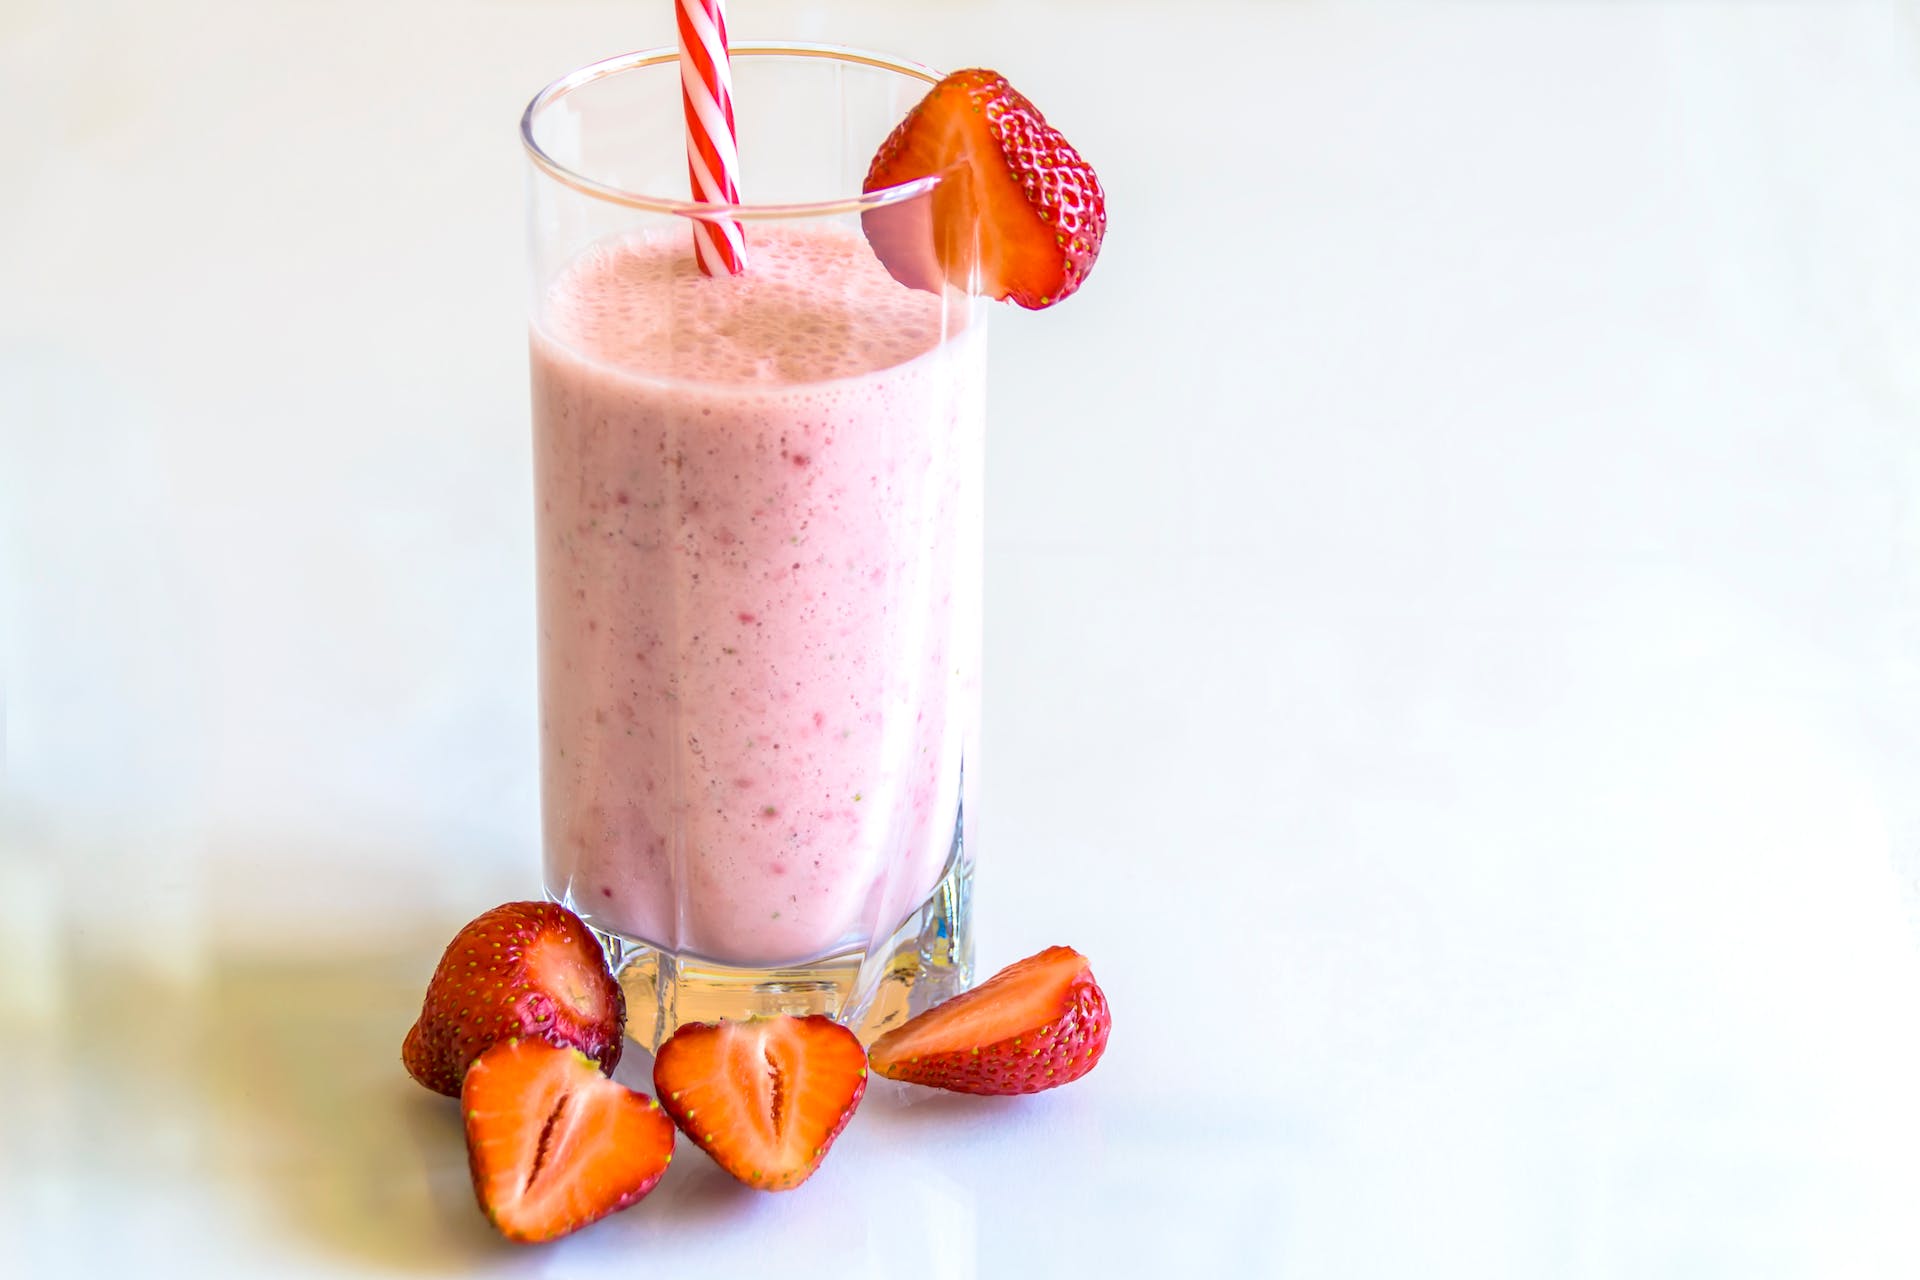 A strawberry milkshake with strawberry pieces | Source: Pexels